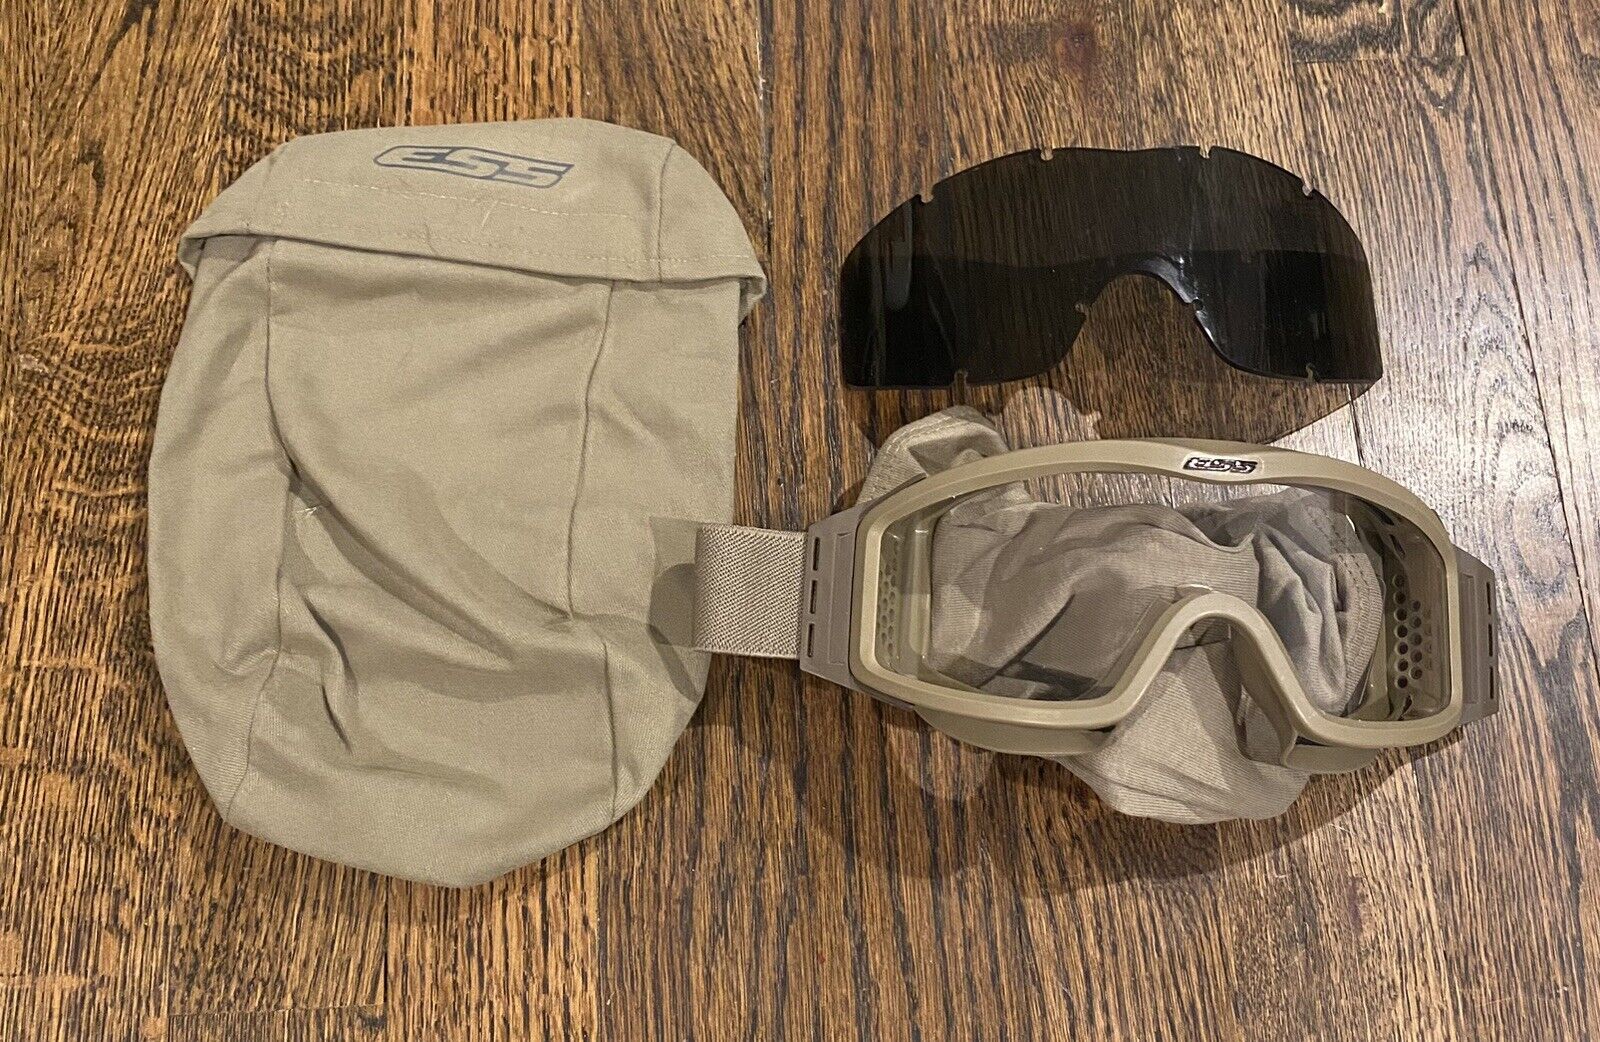 ESS PROFILE NVG MILITARY GOGGLES NSN:4240-01-630-7259